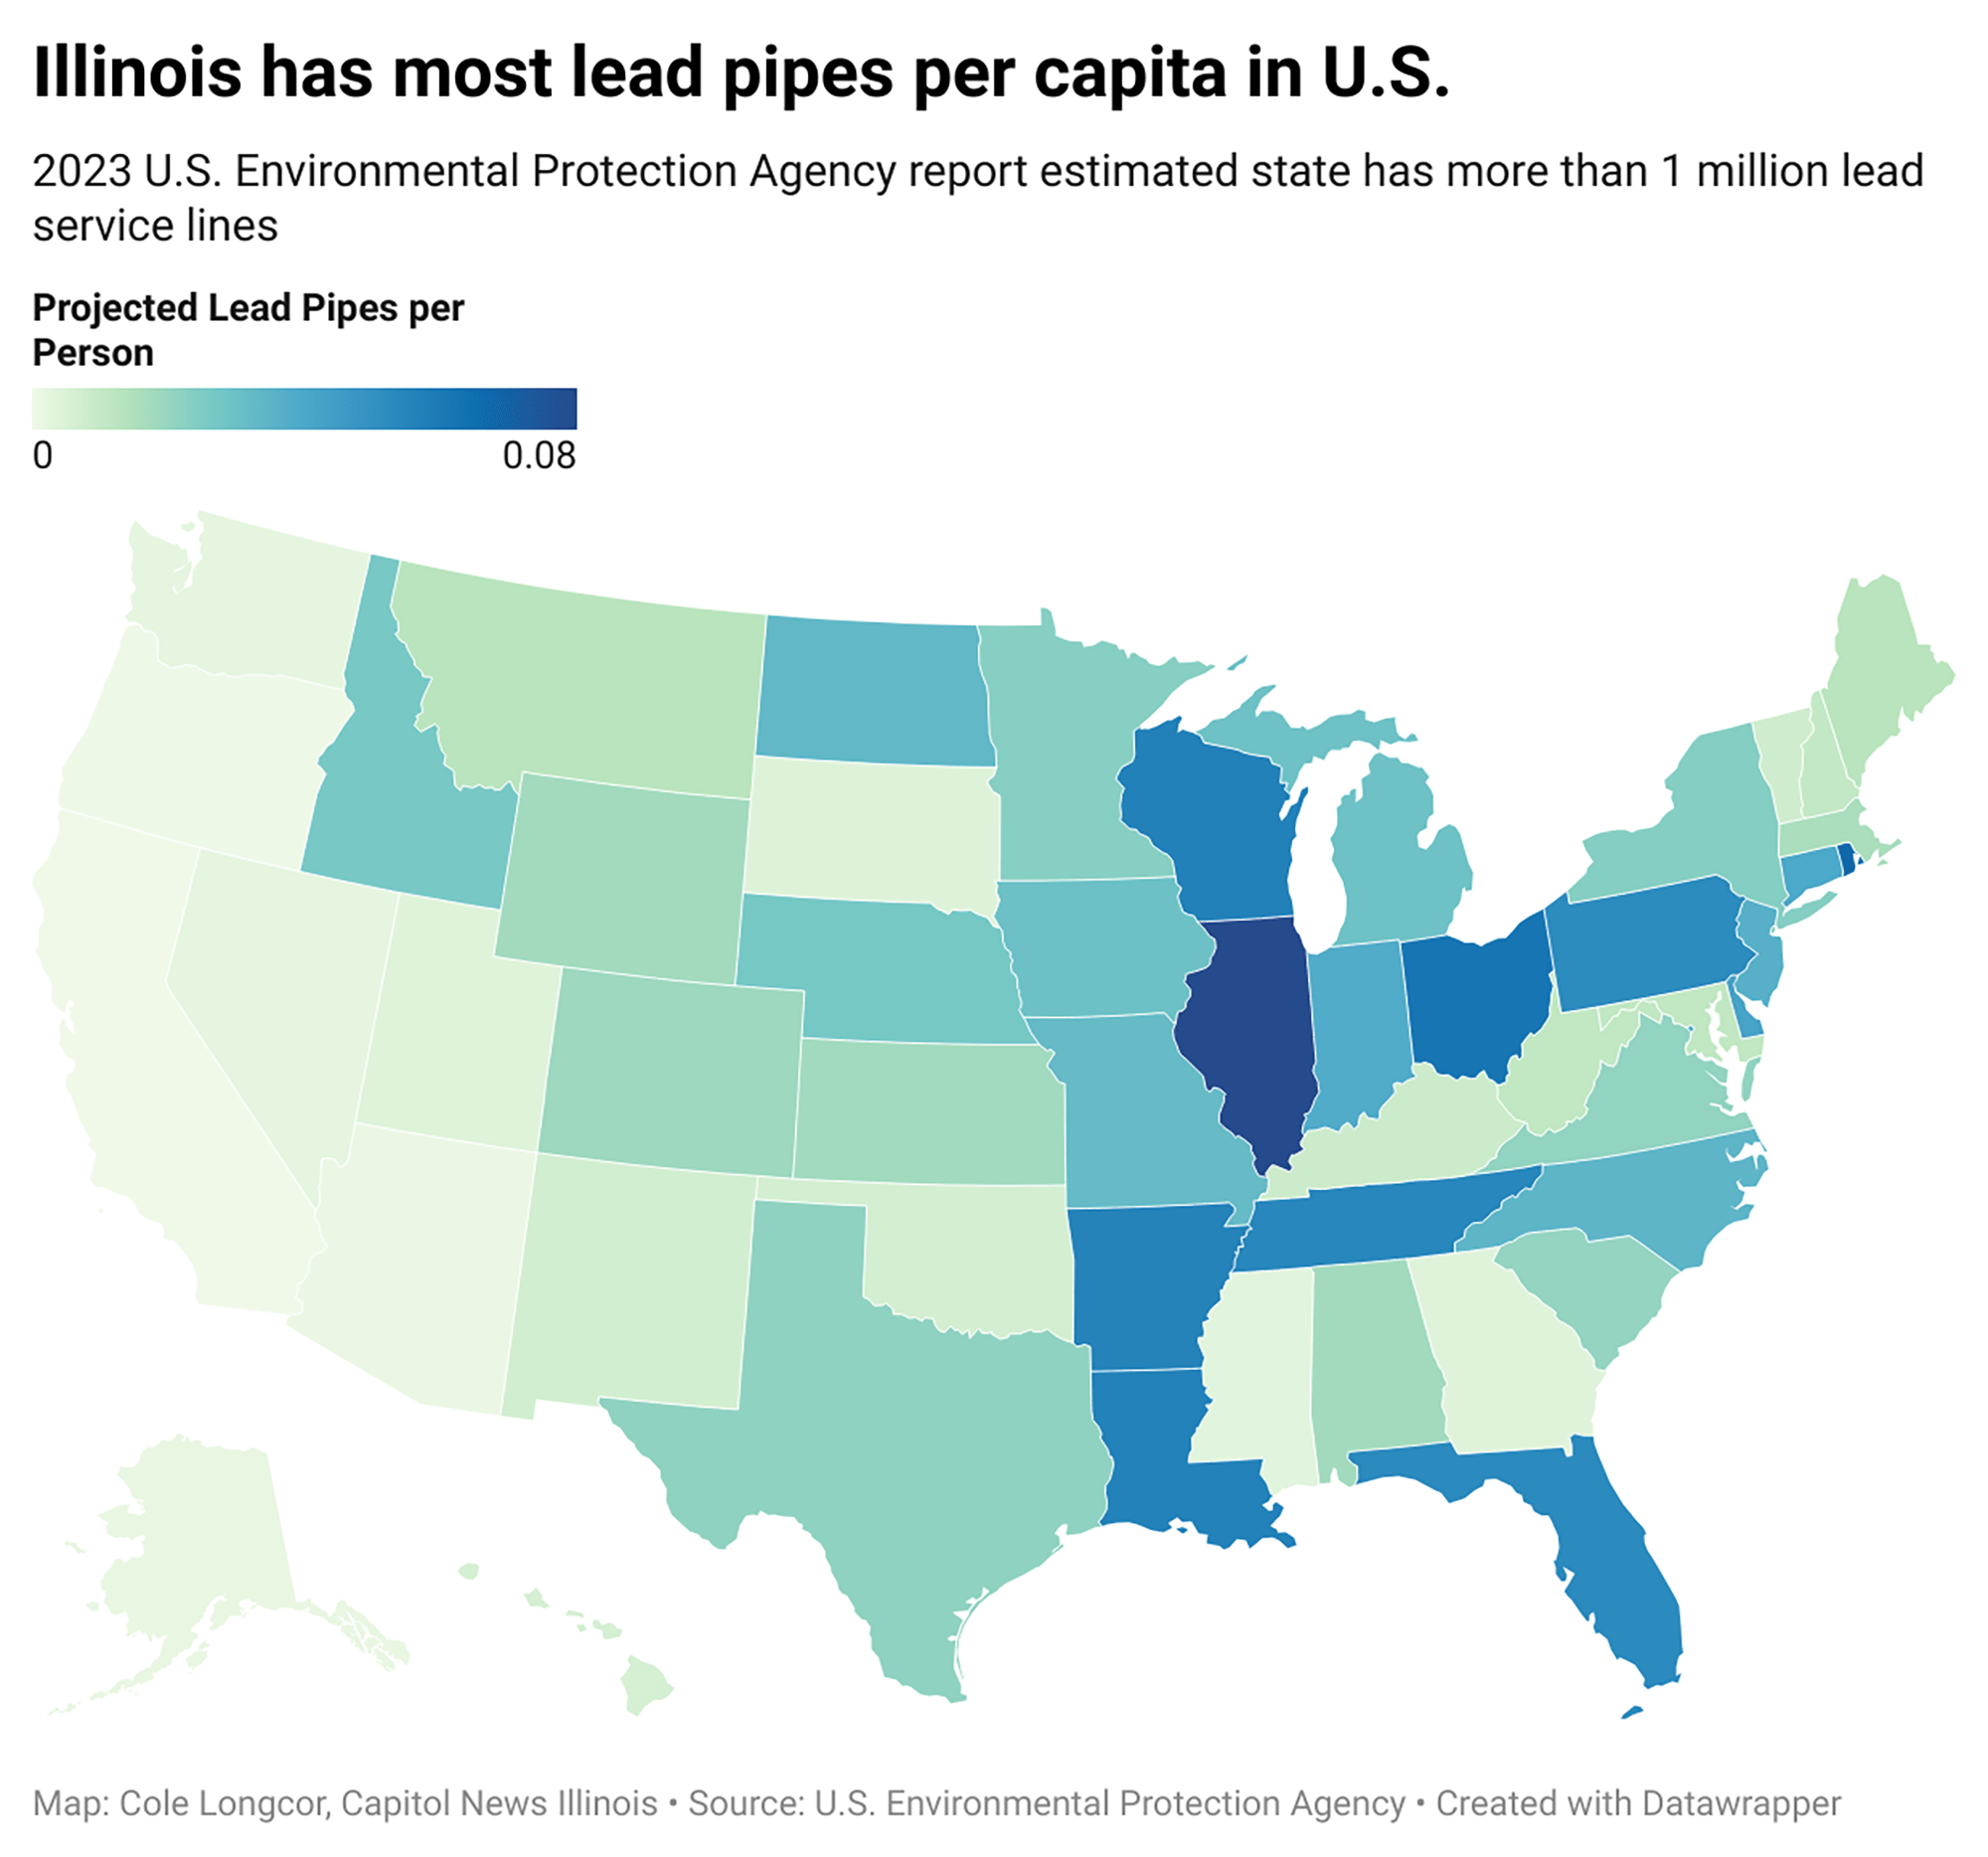 A 2023 U.S. Environmental Protection Agency report estimated Illinois has the most lead service lines per capita in the country. (Capitol News Illinois graphic by Cole Longcor)